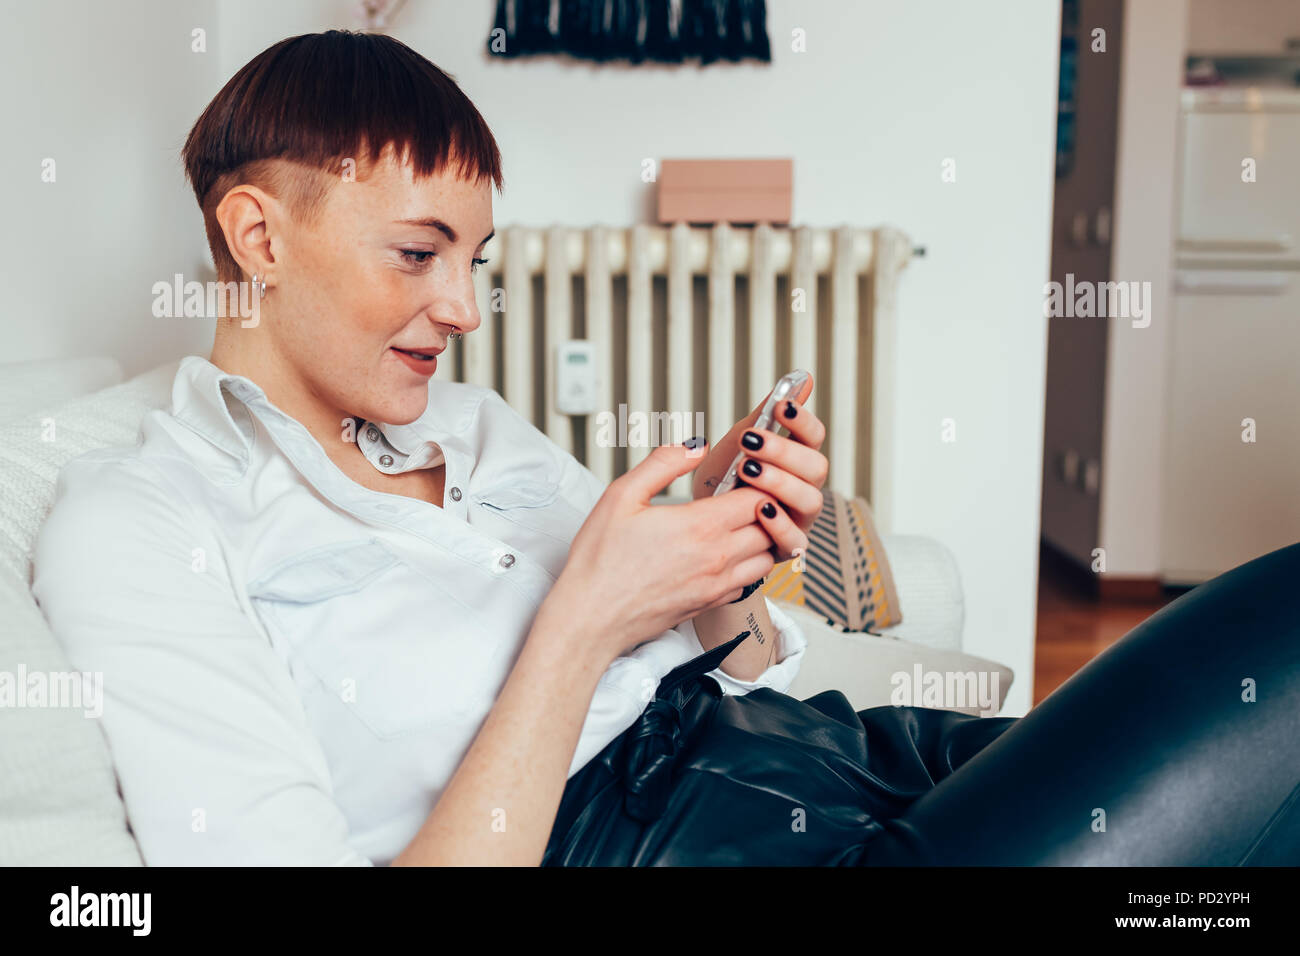 Woman sitting texting on mobile phone smiling Stock Photo